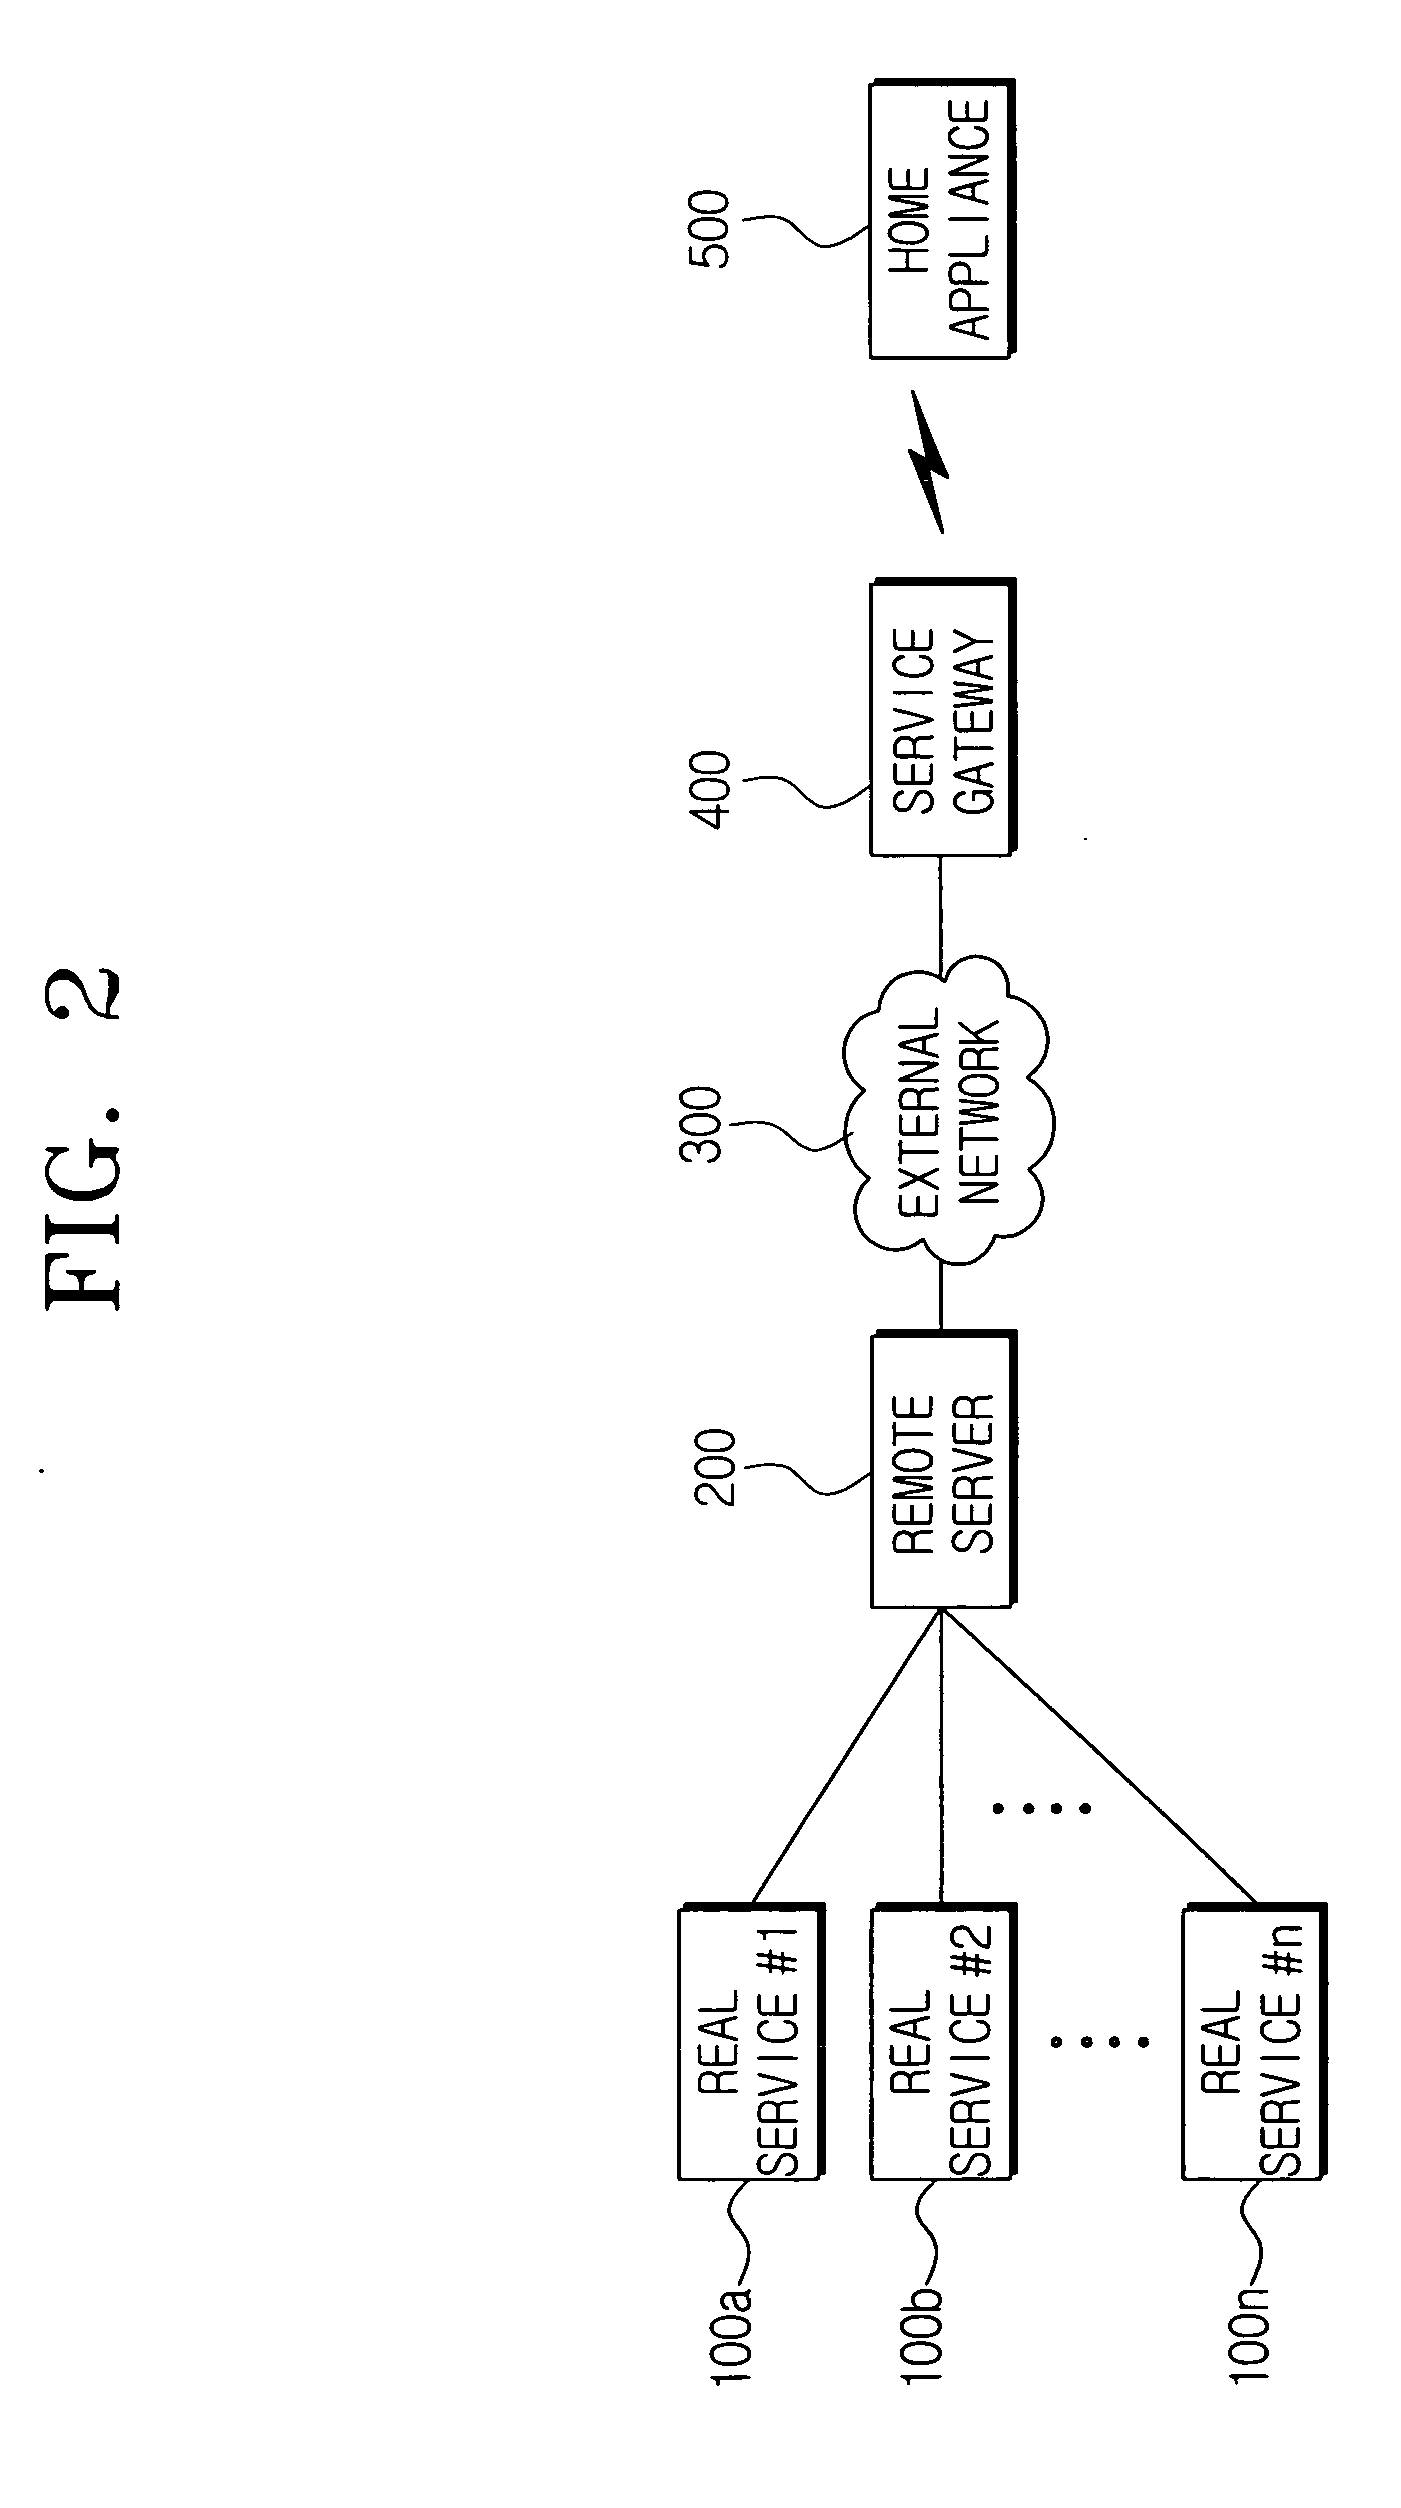 Service gateway system and method of using the same